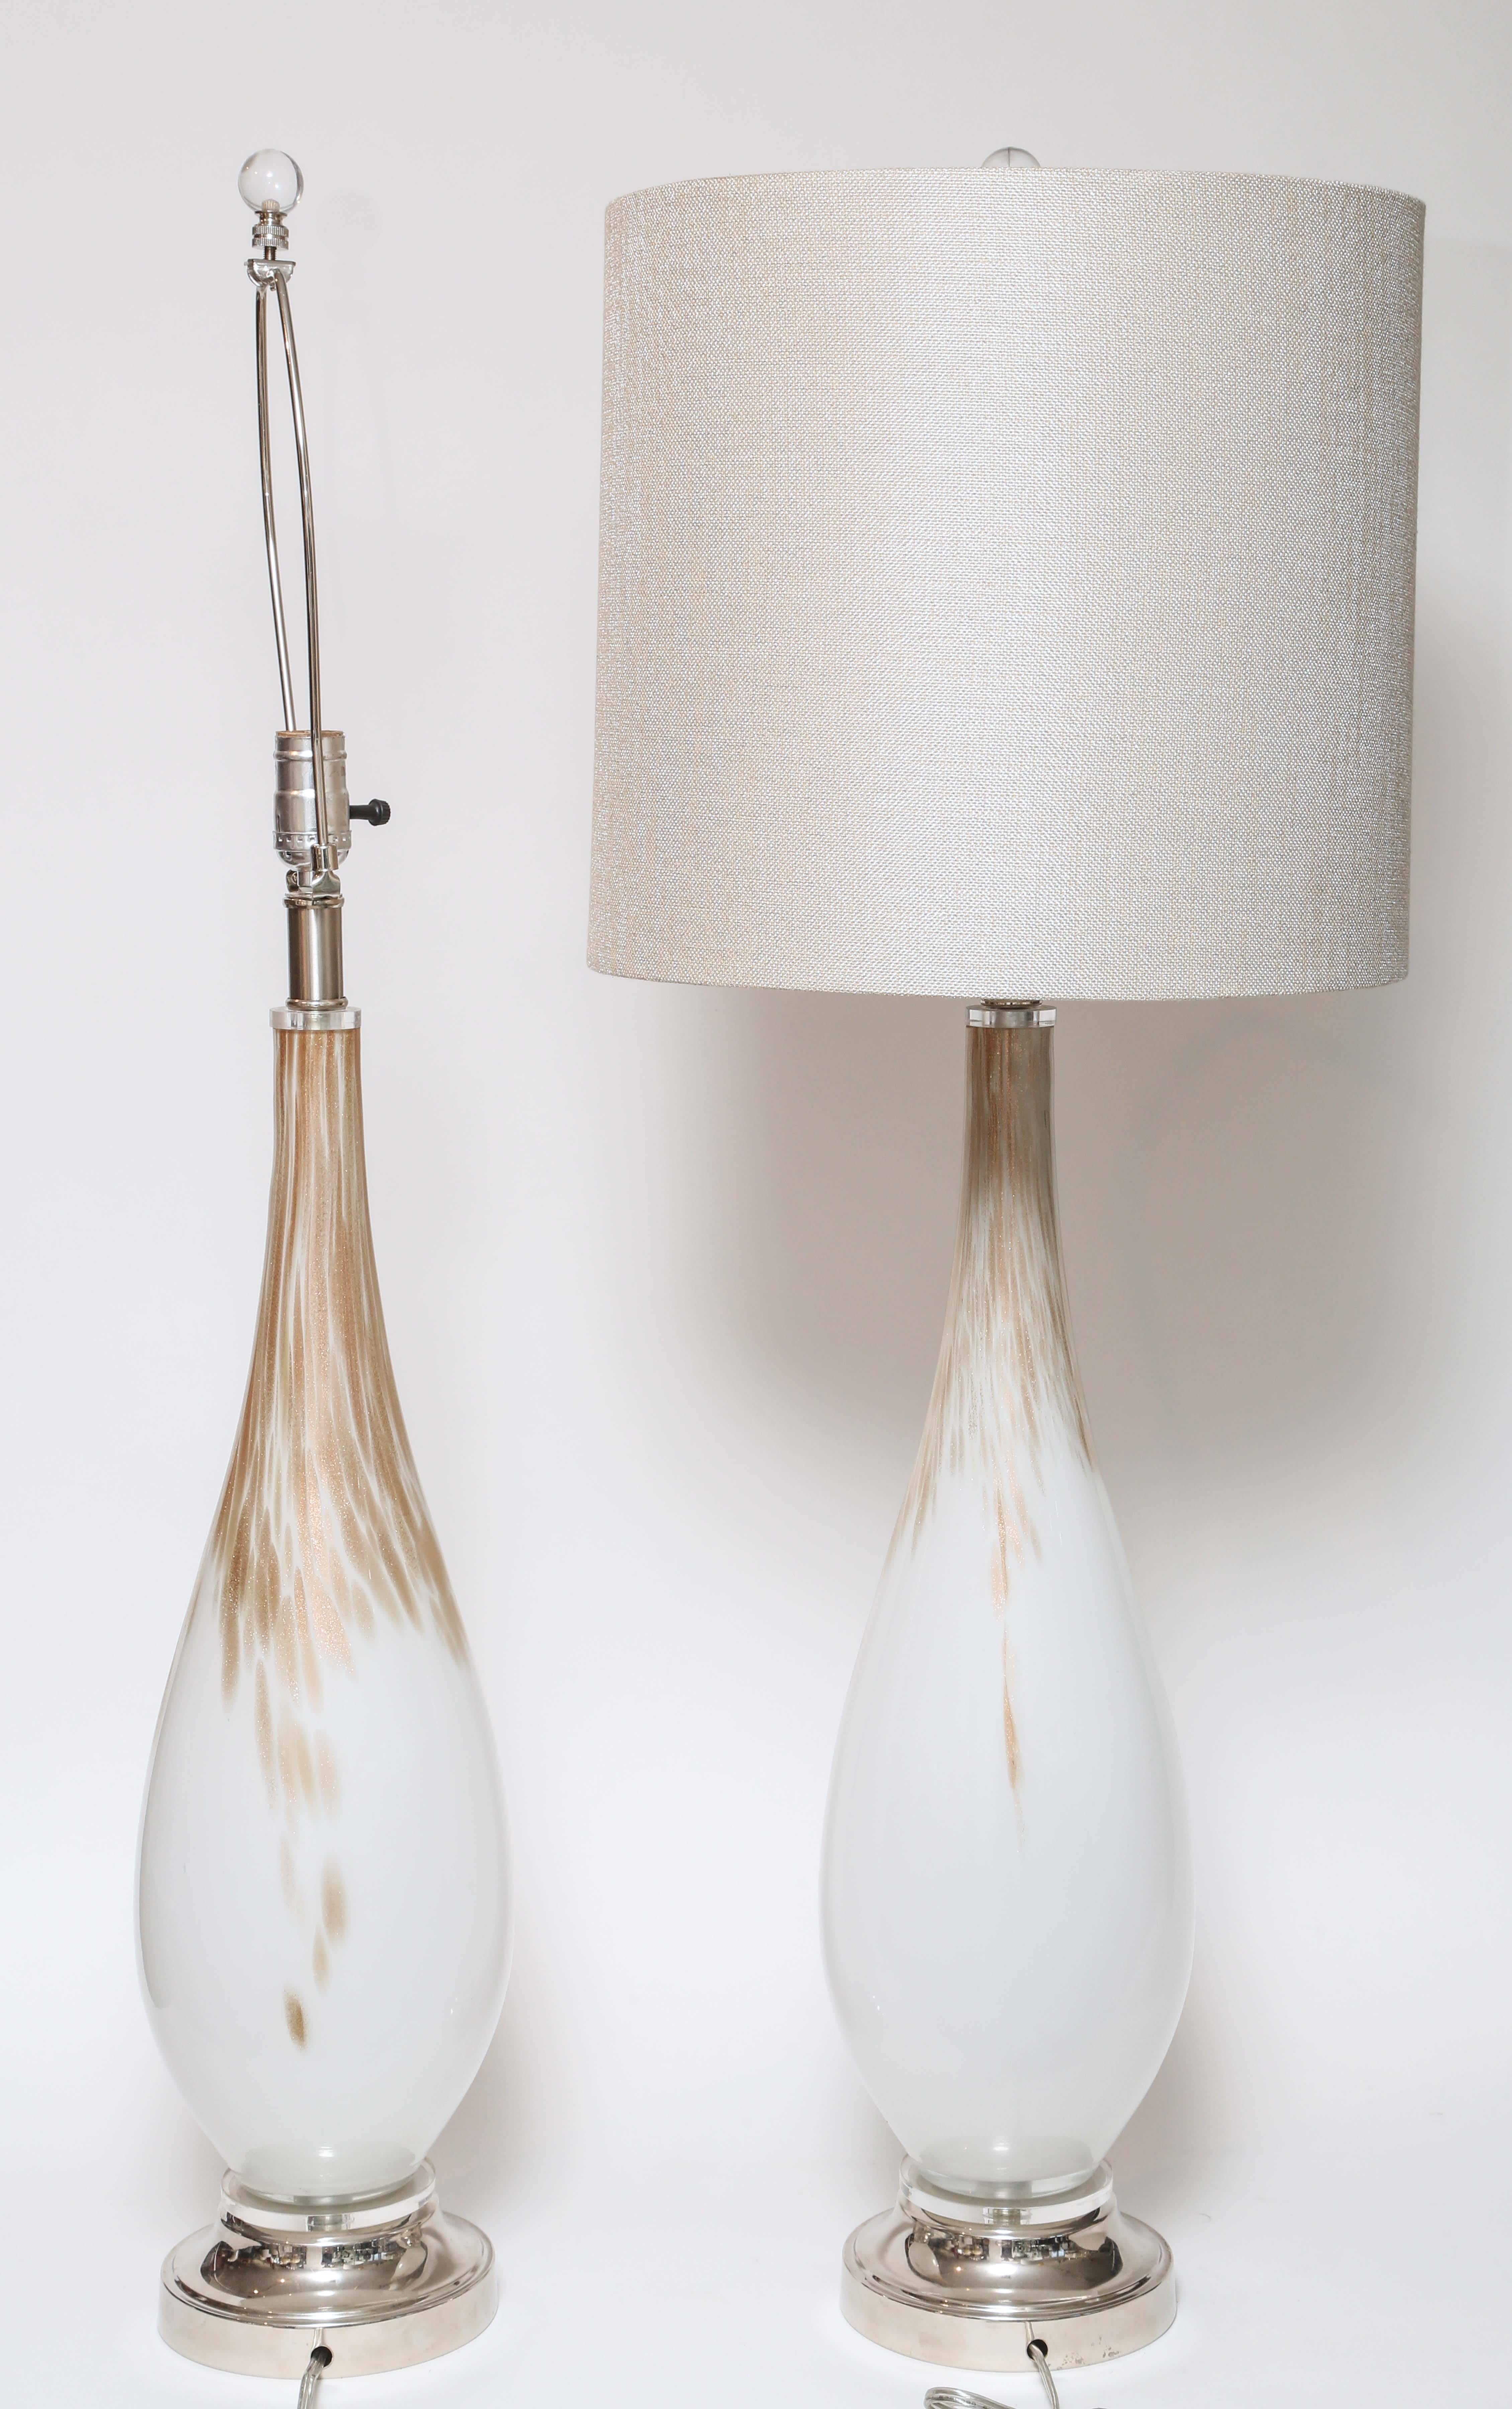 Pair of Mid-Century Modern Italian Murano Copper/White Glass Teardrop Lamps For Sale 1